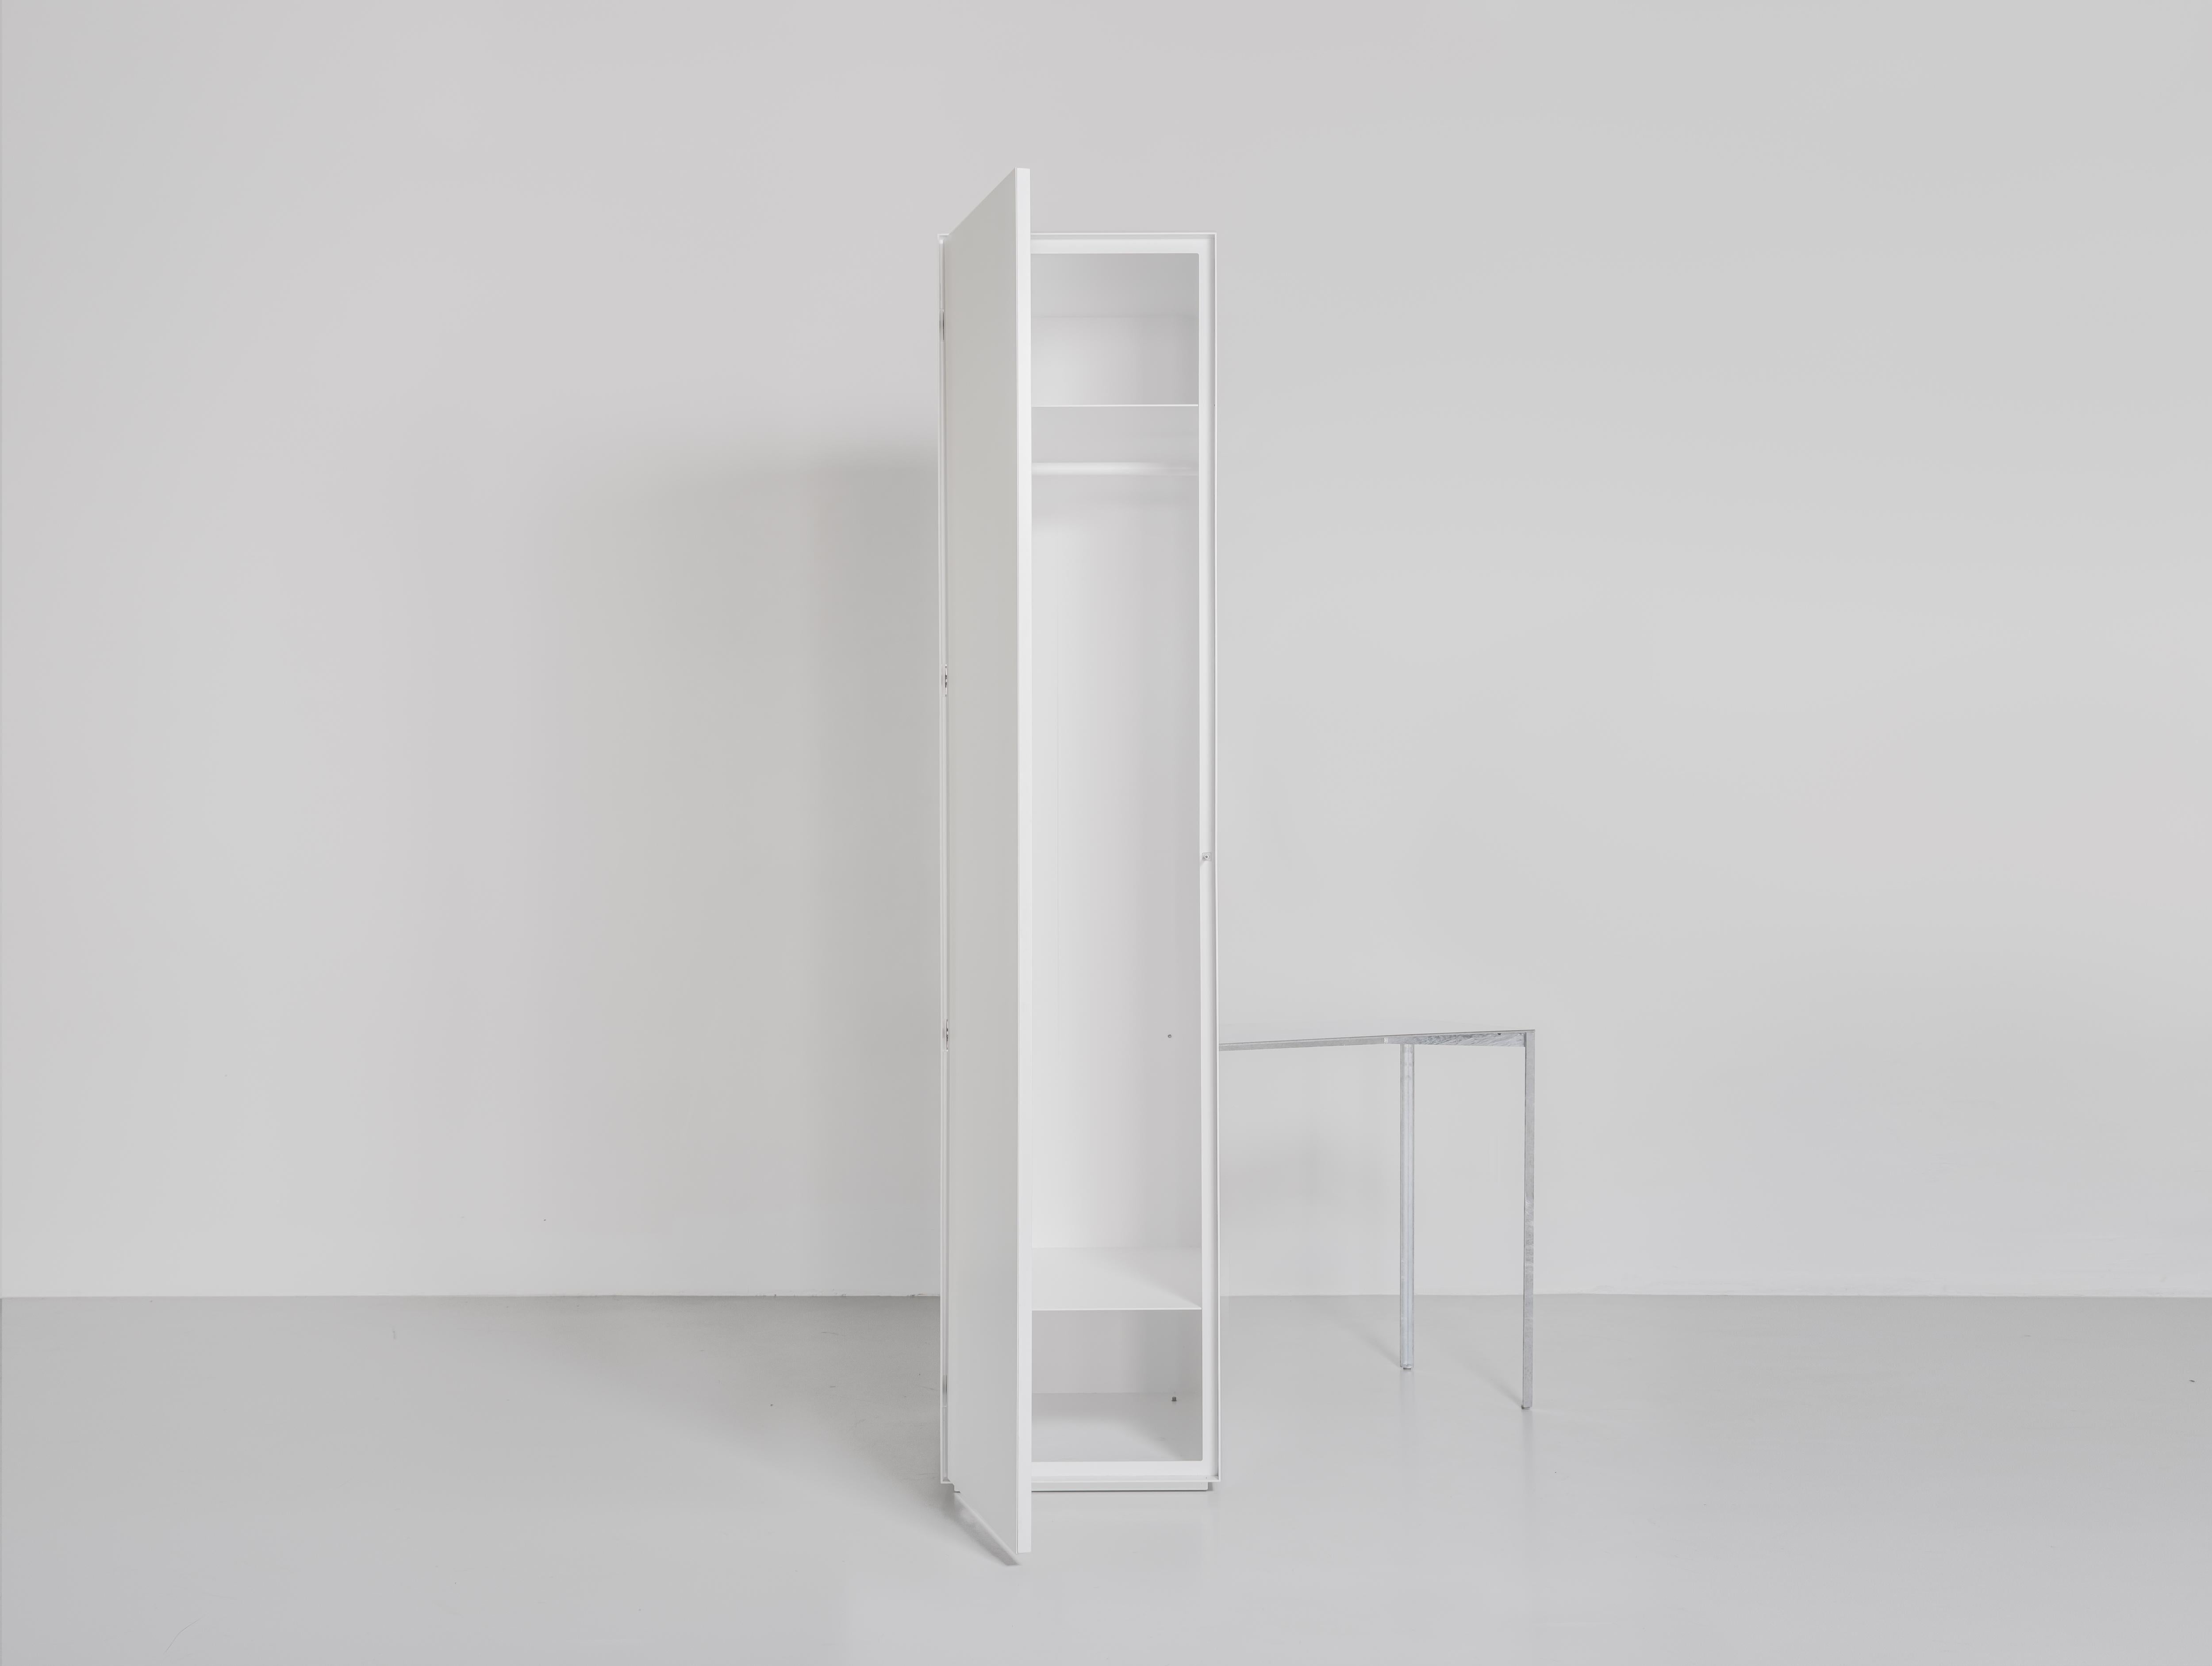 Sam Chermayeff
Storage with Side Table
From the series “Beasts”
Produced in exclusive for SIDE GALLERY
Manufactured by ERTL und ZULL
Berlin, 2021
Galvanized steel, white powder-coated steel
Contemporary Design 

Measurements
124 cm x cm x